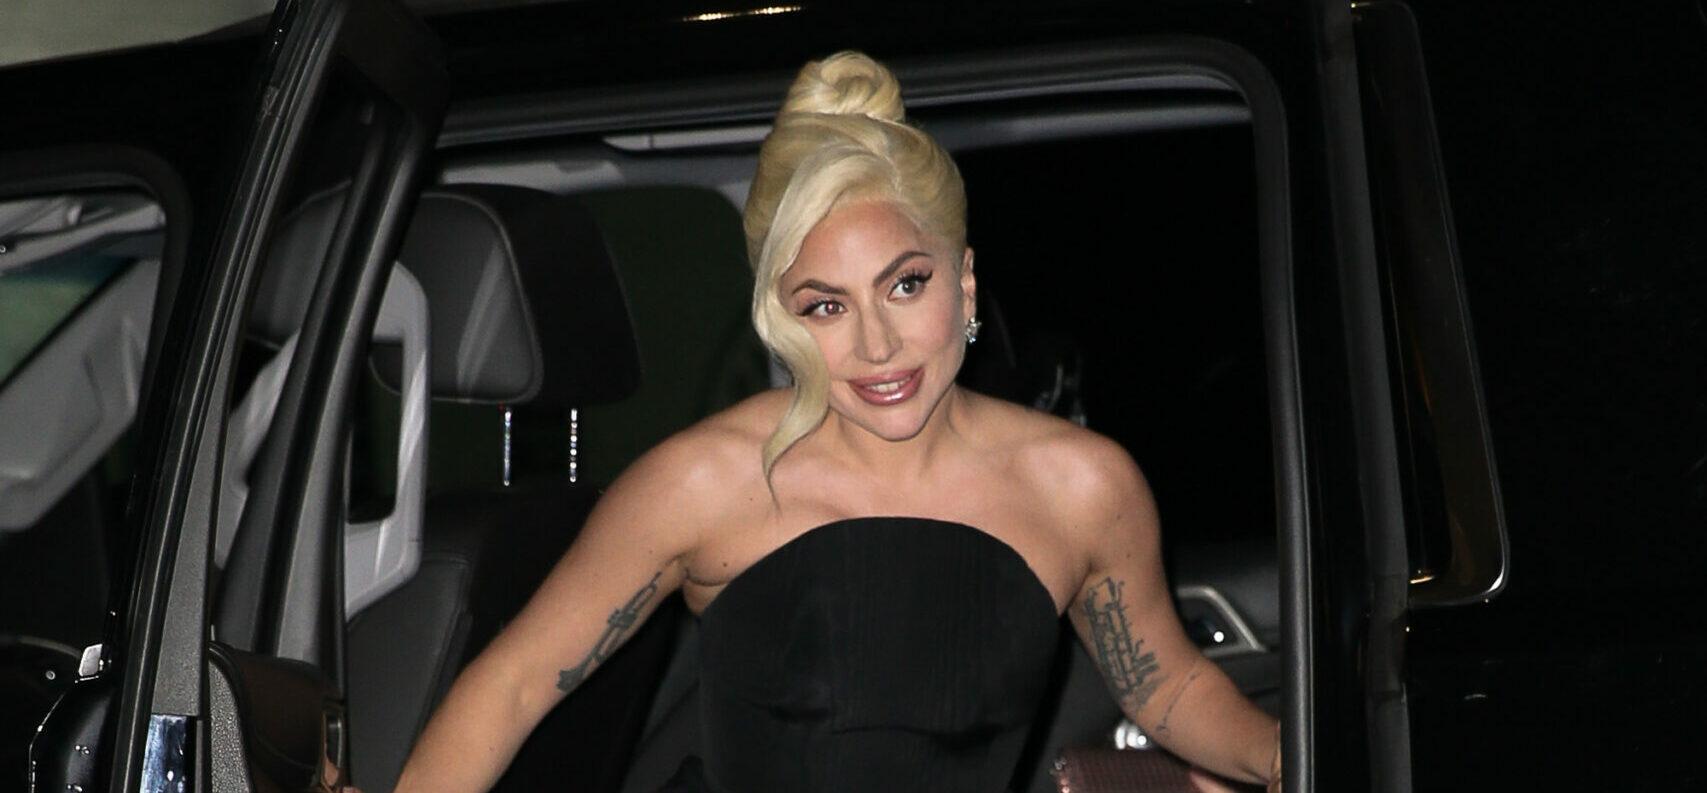 Lady Gaga wears a black gown as arriving at TAO for Film Critic Awards on March 16 2022